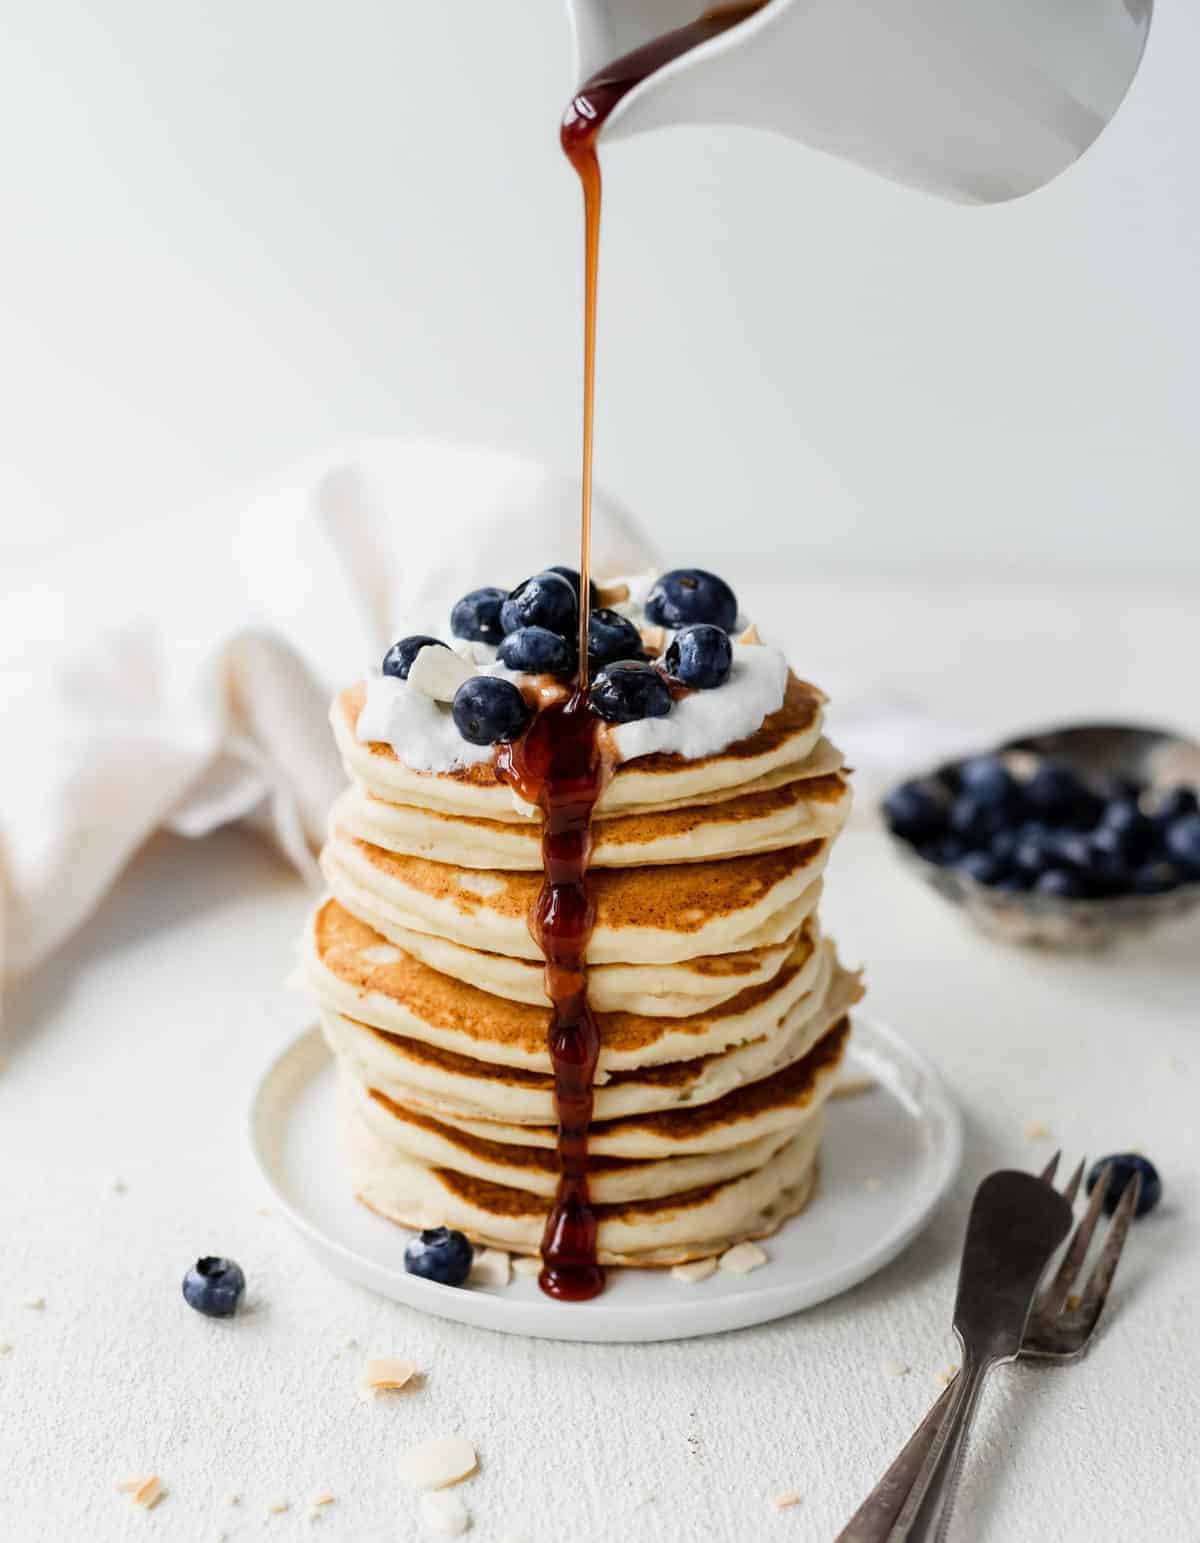 maple syrup being poured over a stack of ricotta pancakes on a plate